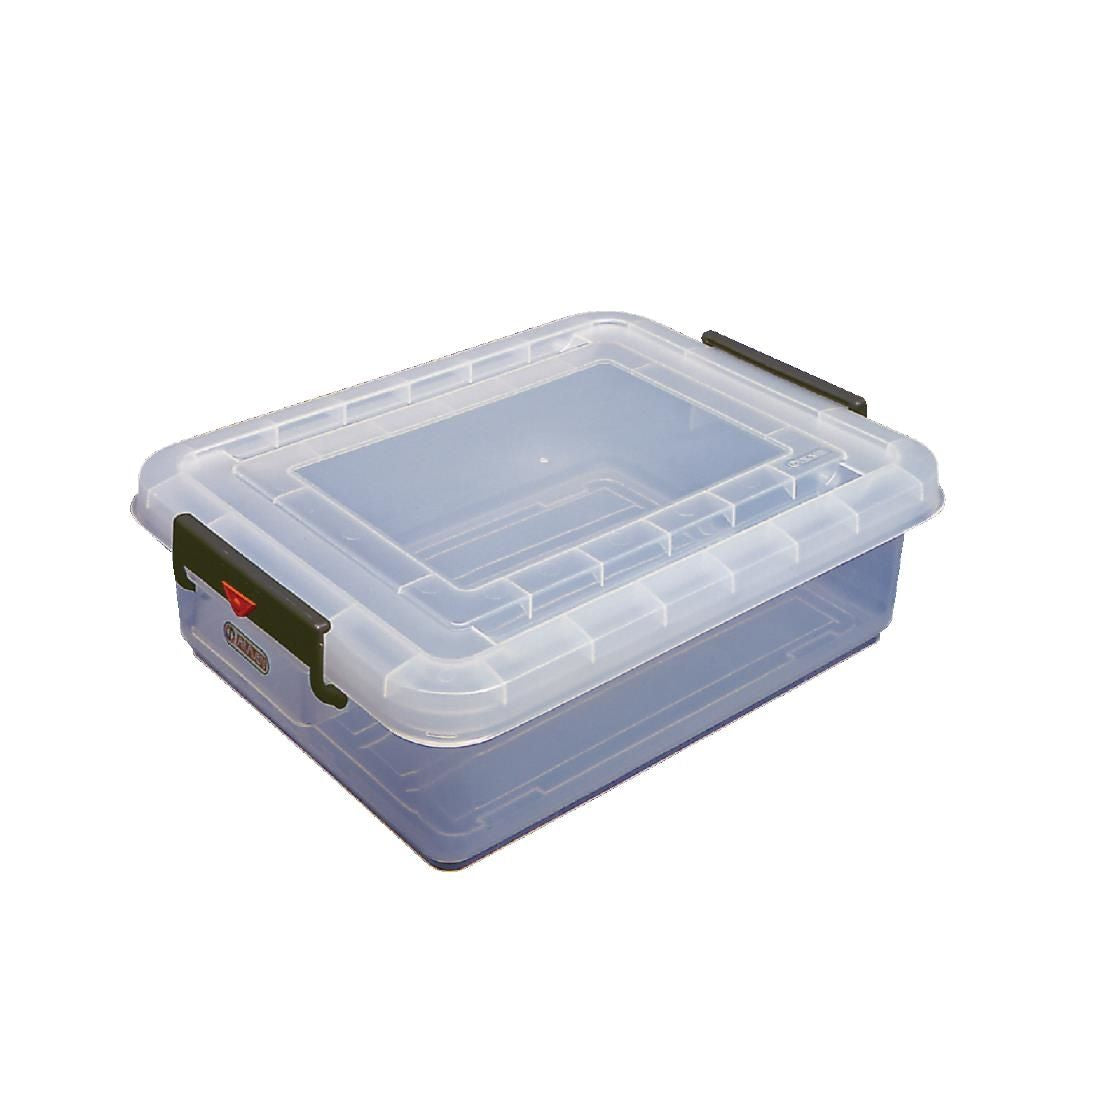 Araven Polypropylene Food Storage Container 30Ltr JD Catering Equipment Solutions Ltd